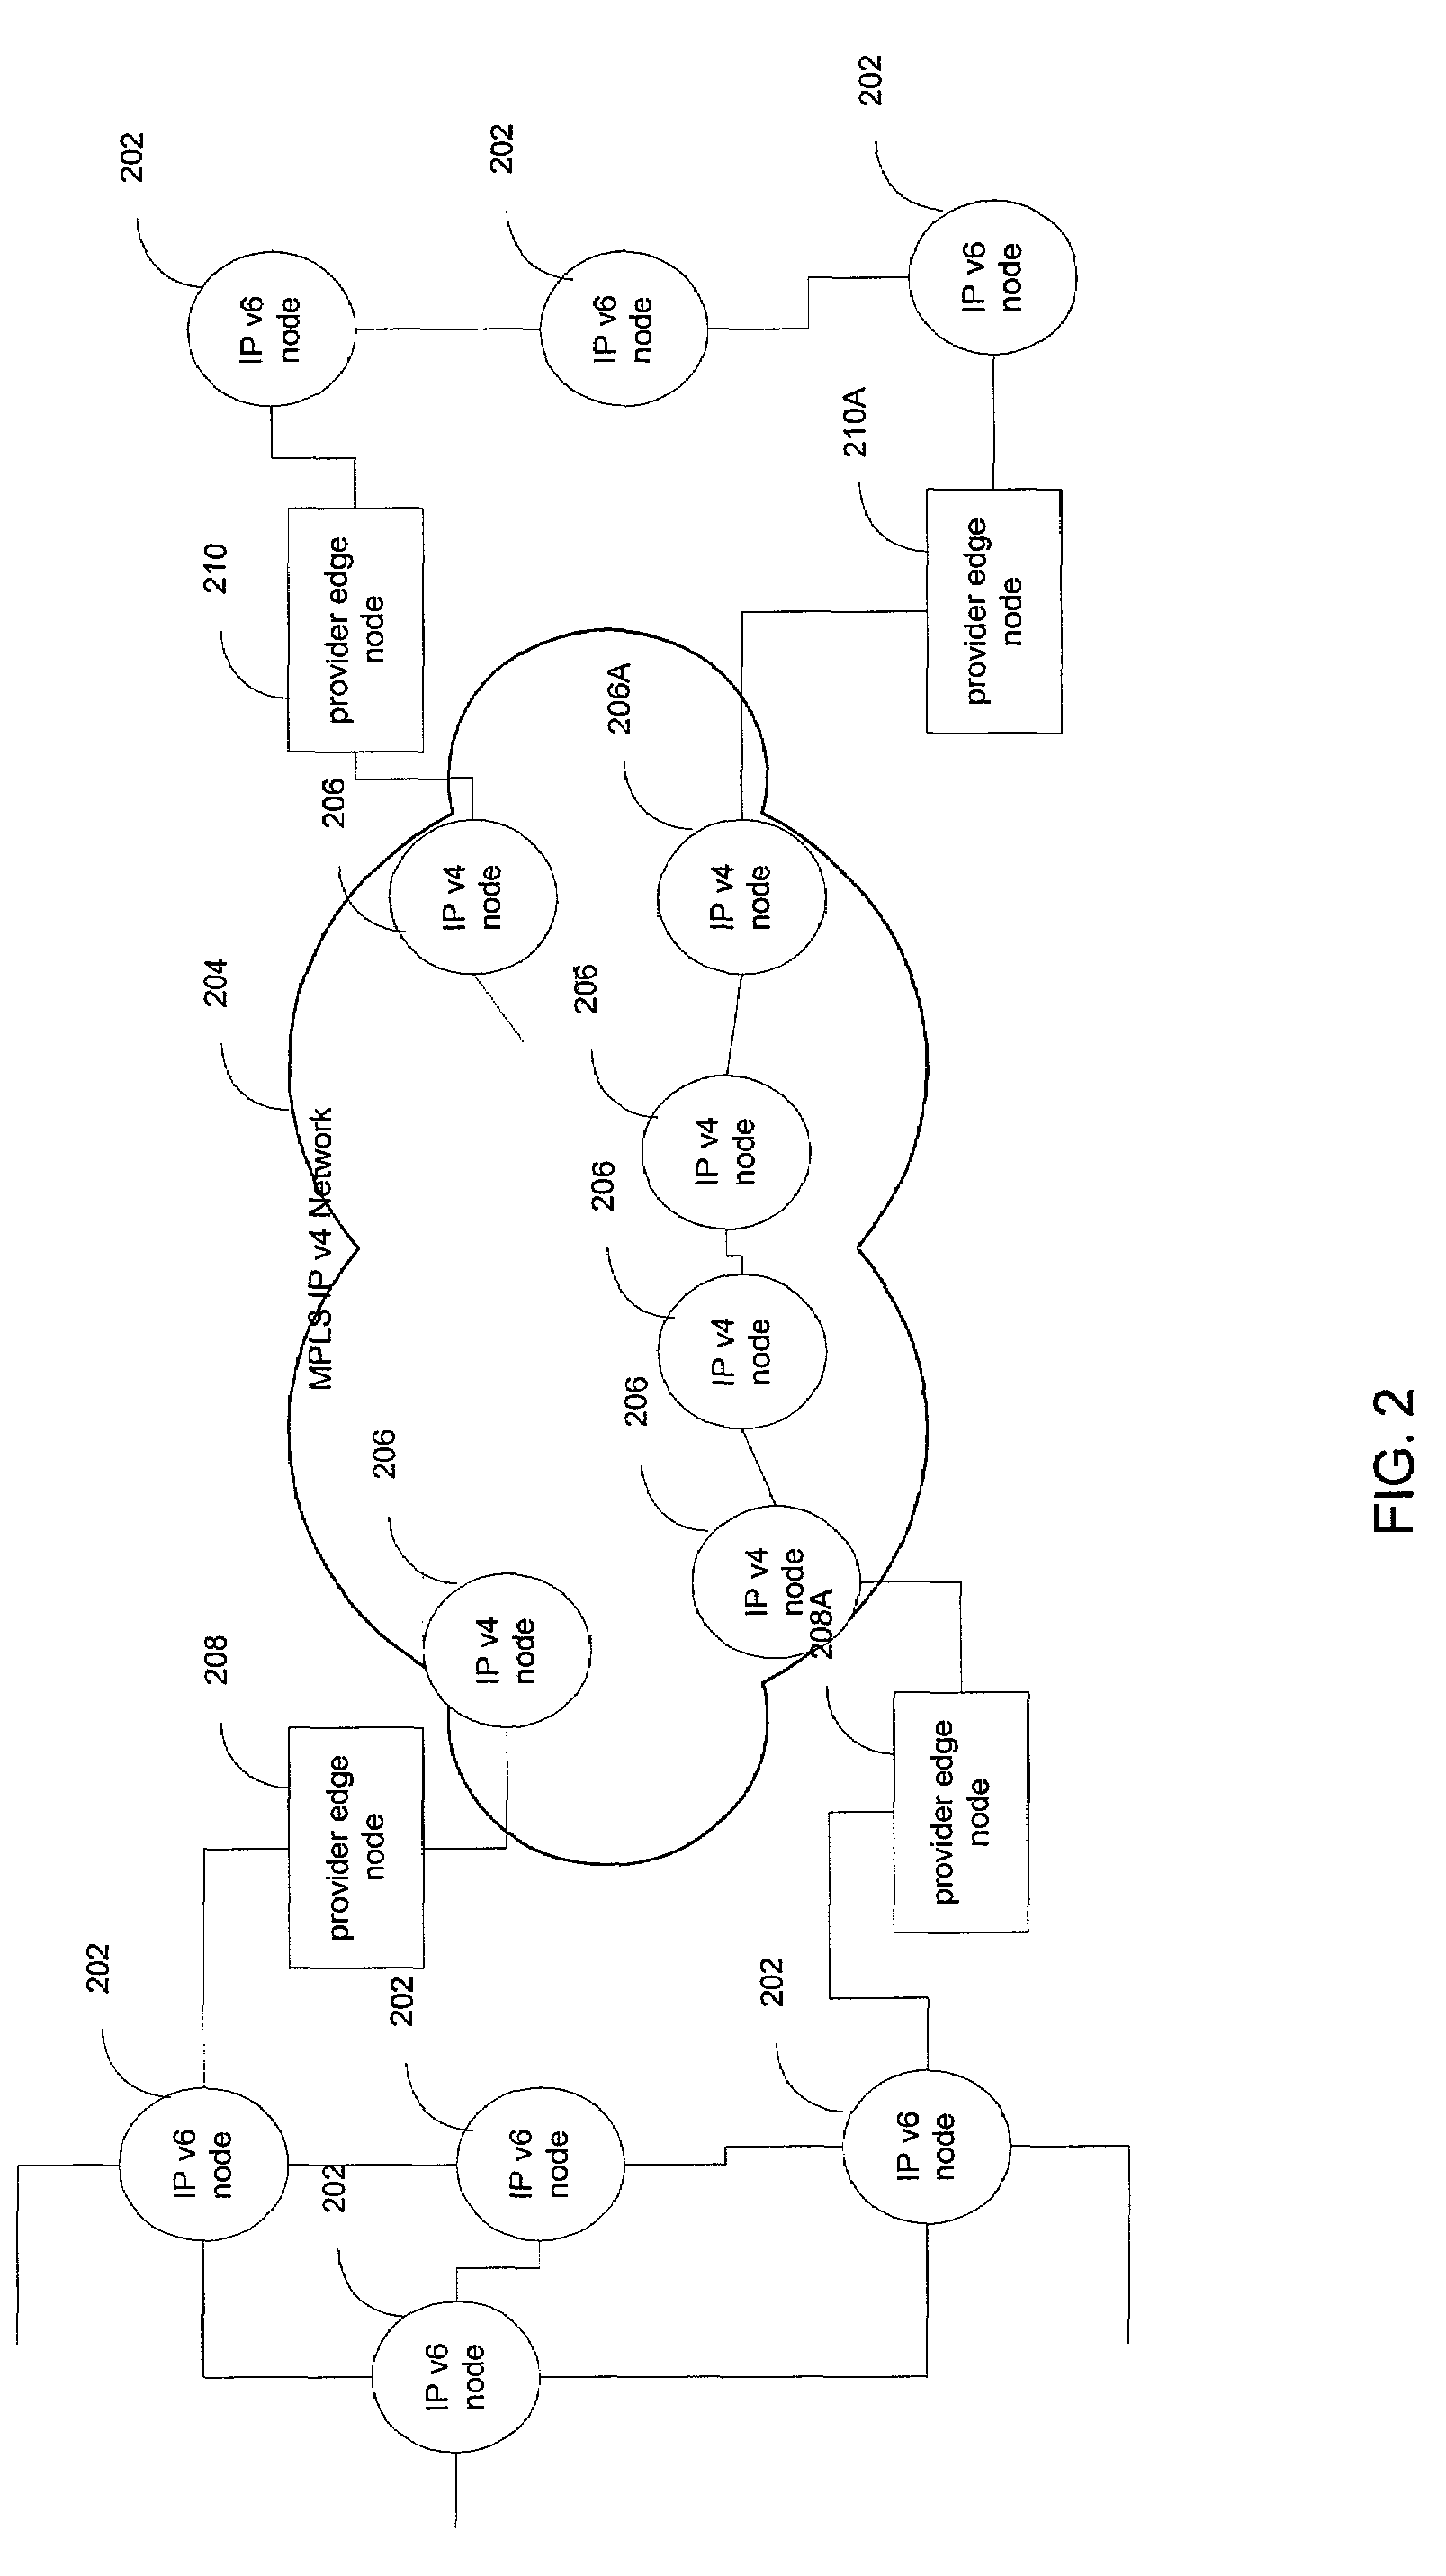 Two label stack for transport of network layer protocols over label switched networks